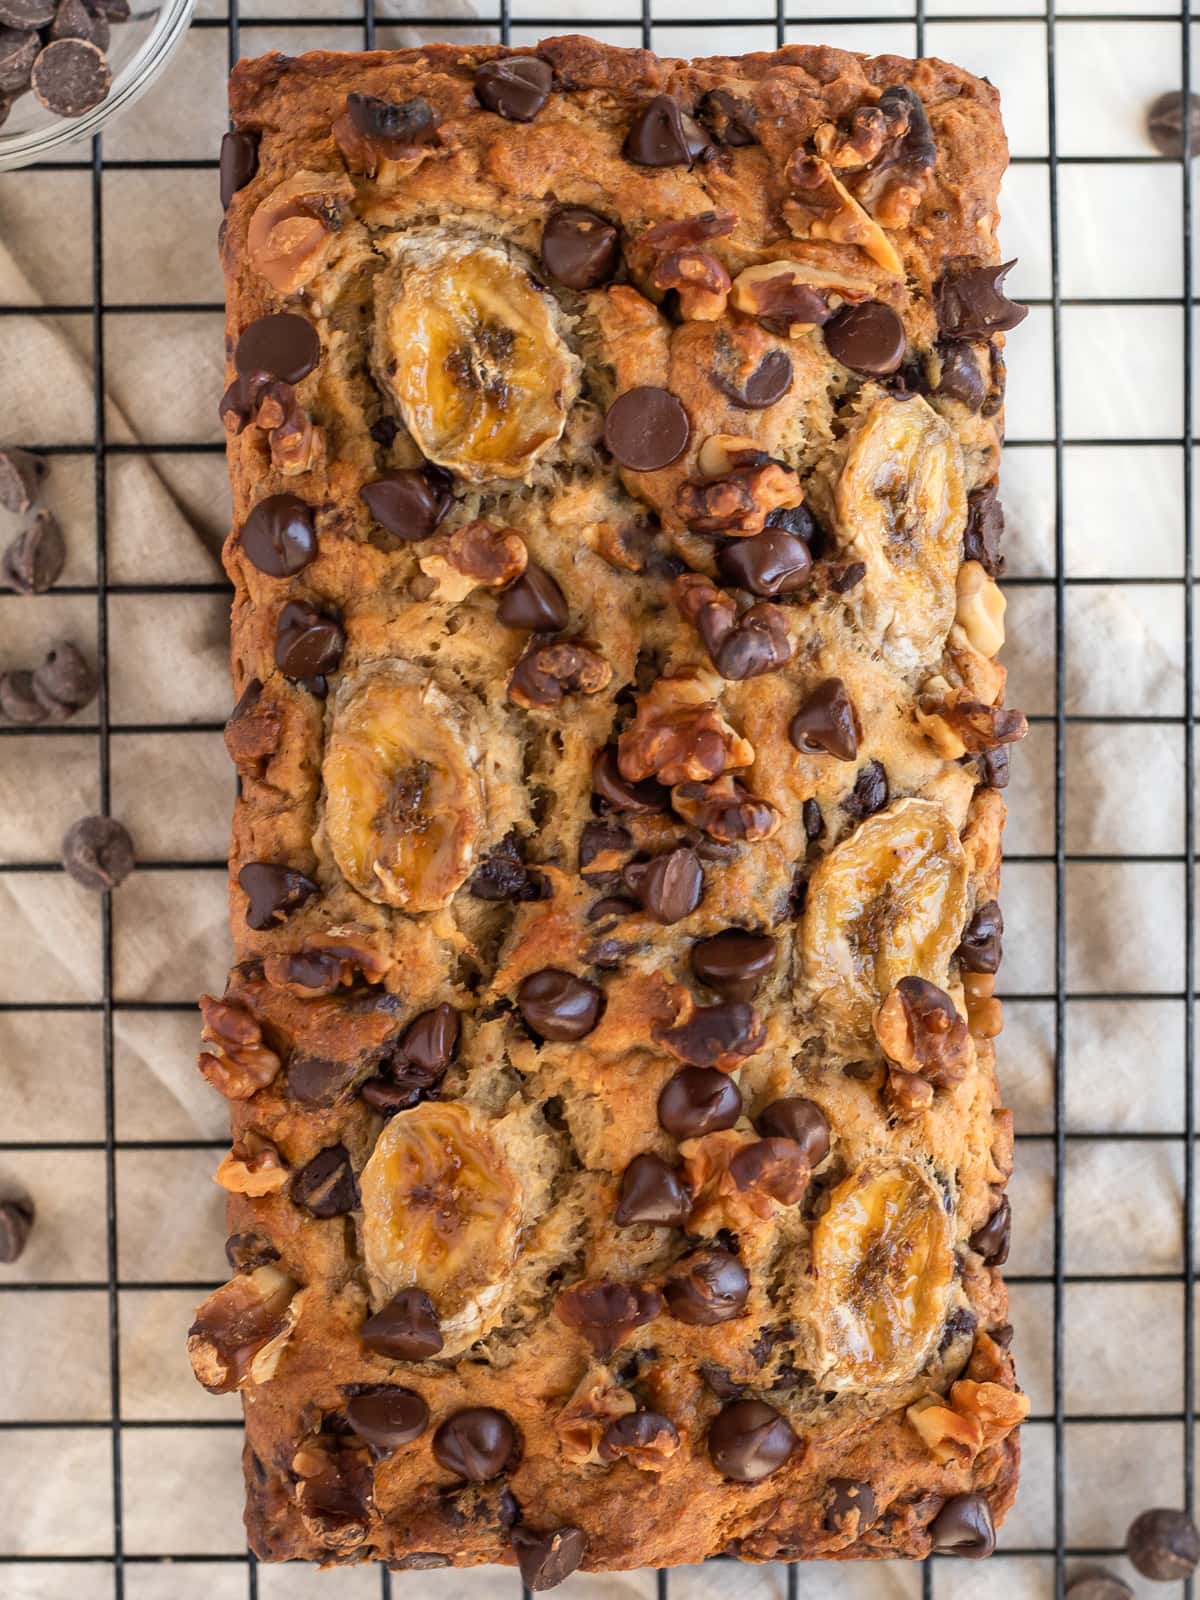 Banana bread with nuts and chocolate chips cooling on a wire rack.